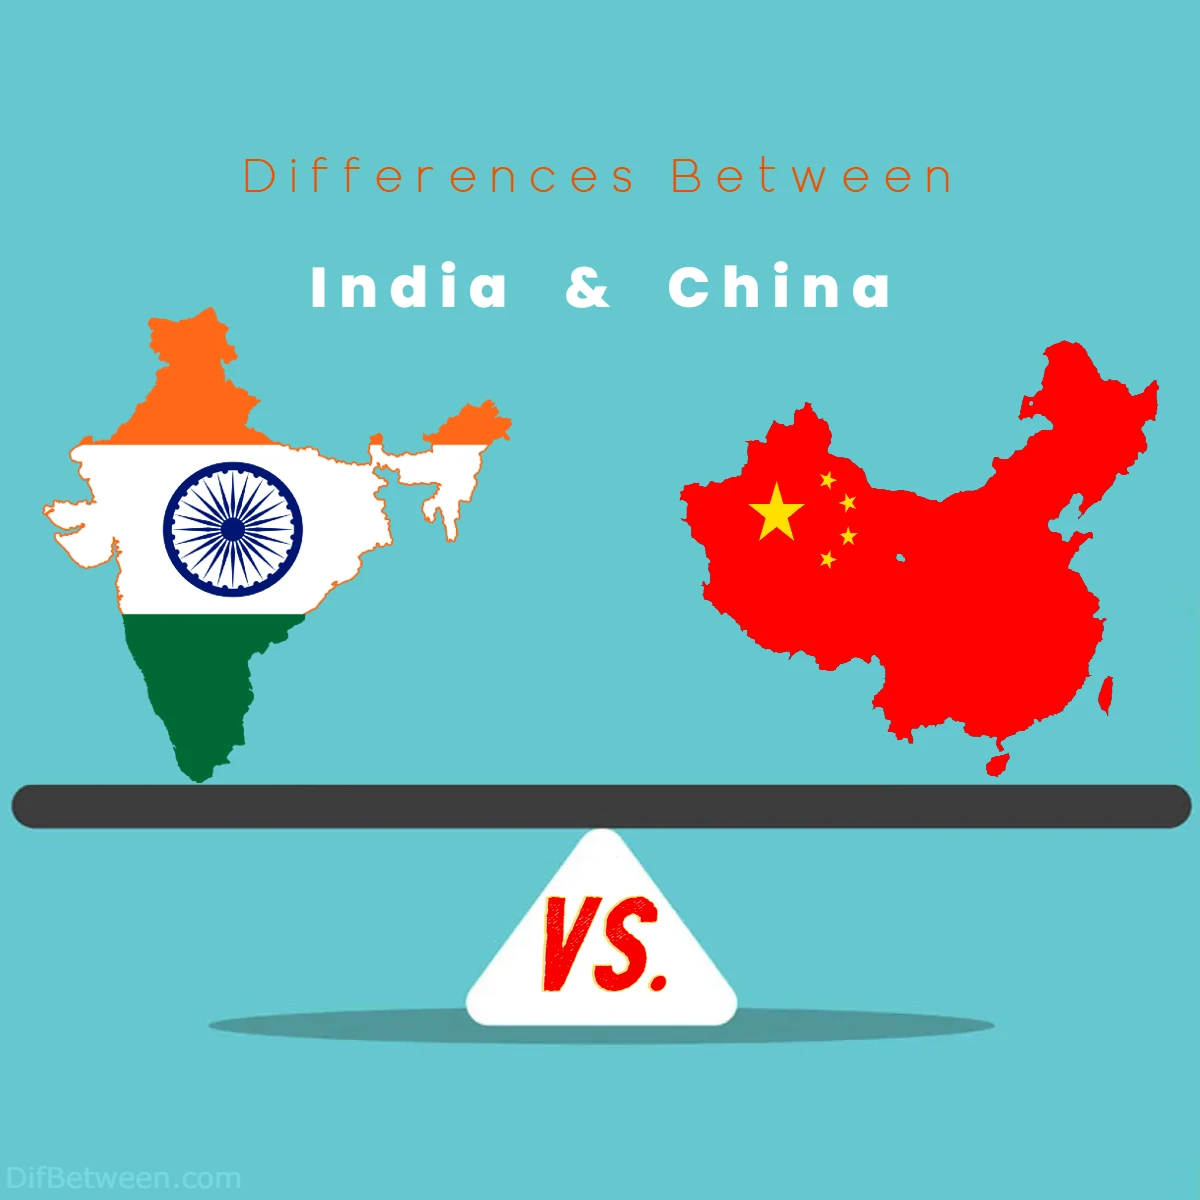 Differences Between India vs China